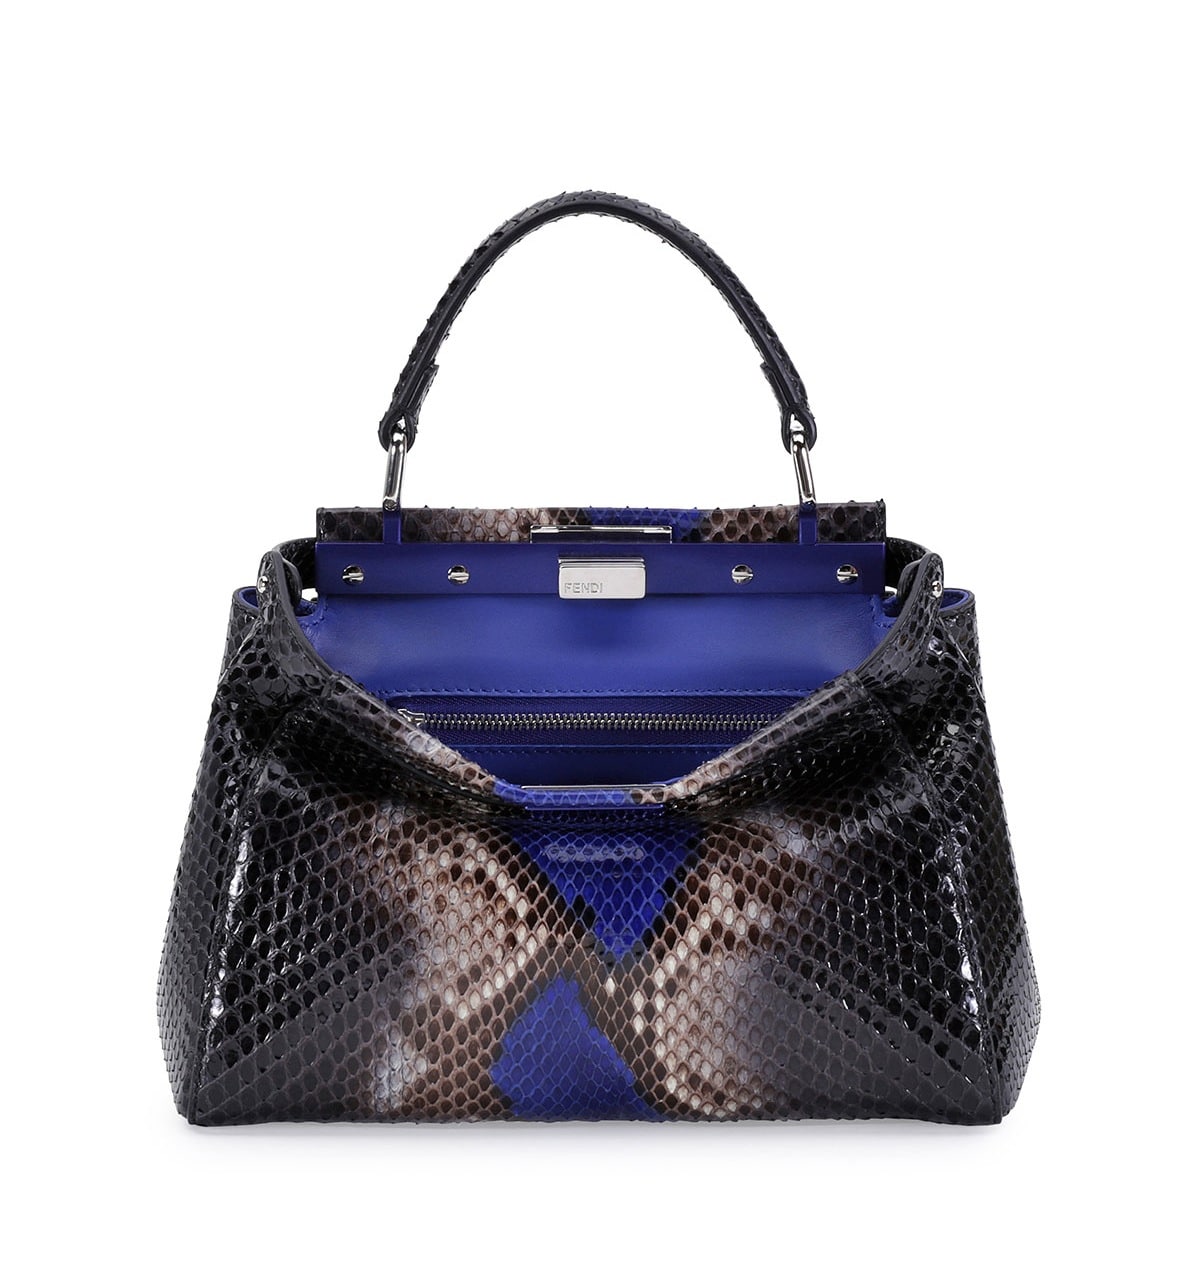 Fendi Resort 2015 Bag Collection features new Monster Bag styles – Spotted Fashion